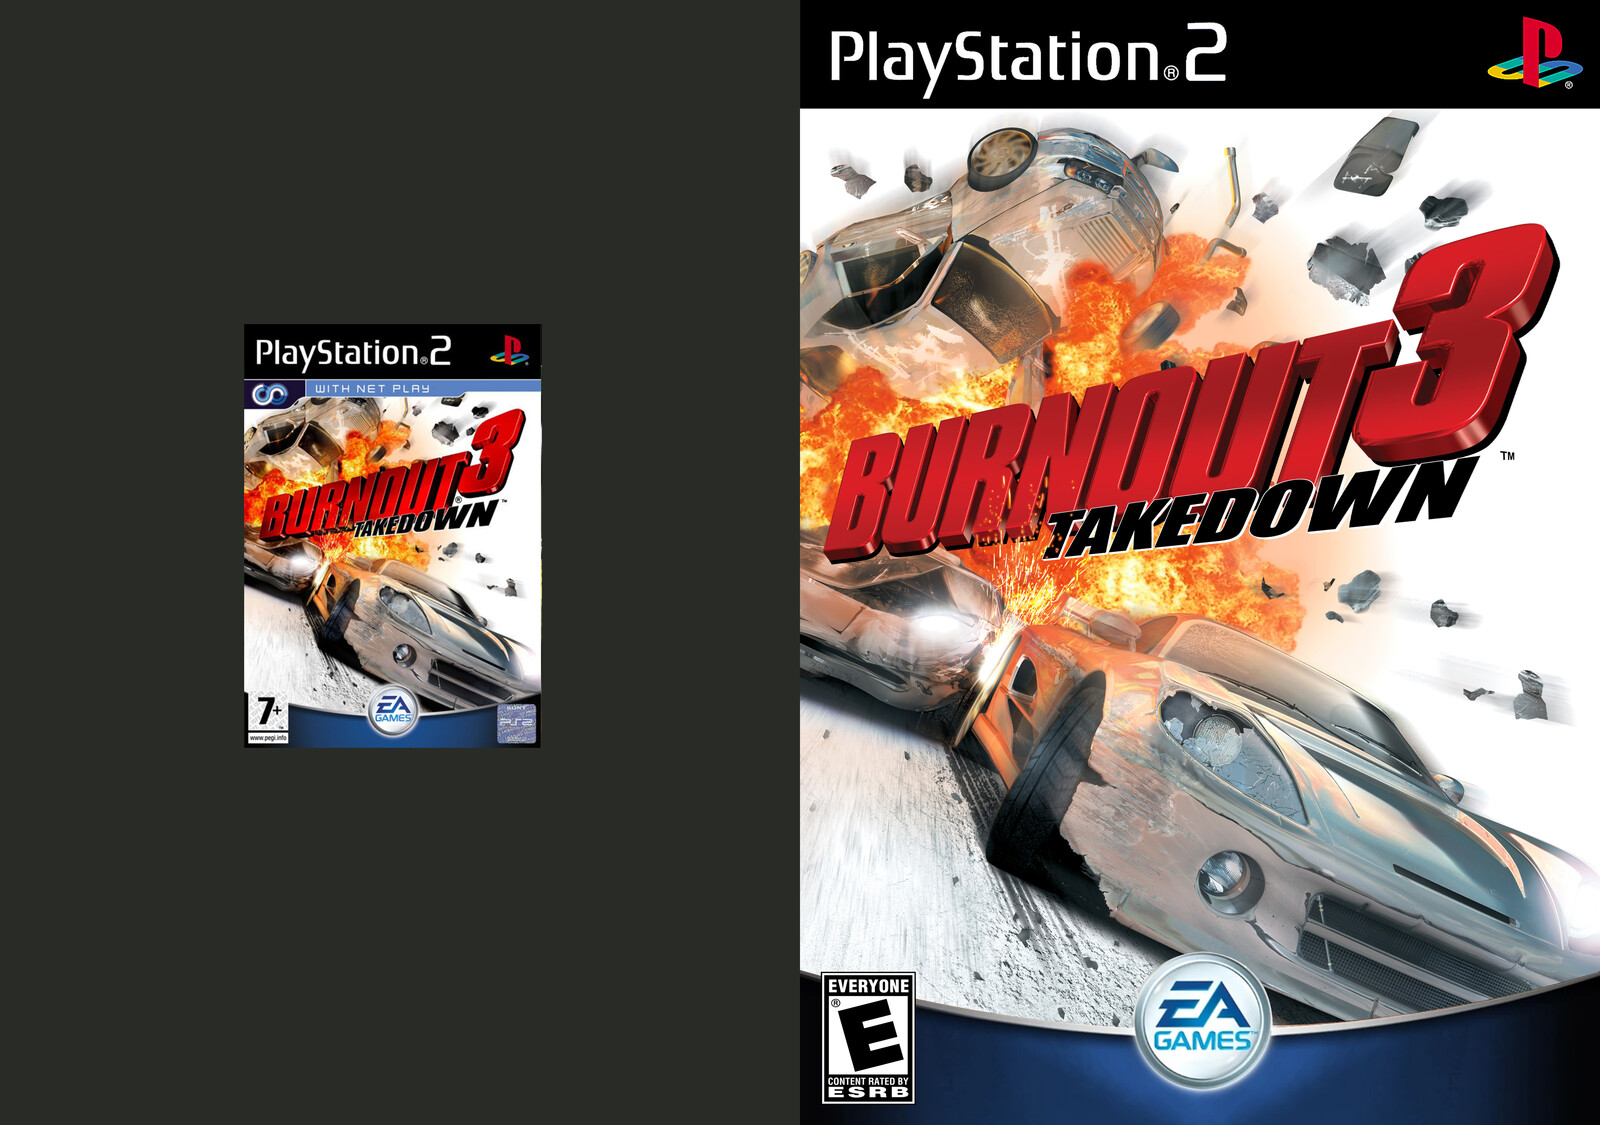 Burnout 3: Takedown (2004) - Scanned cover vs. Upscaled